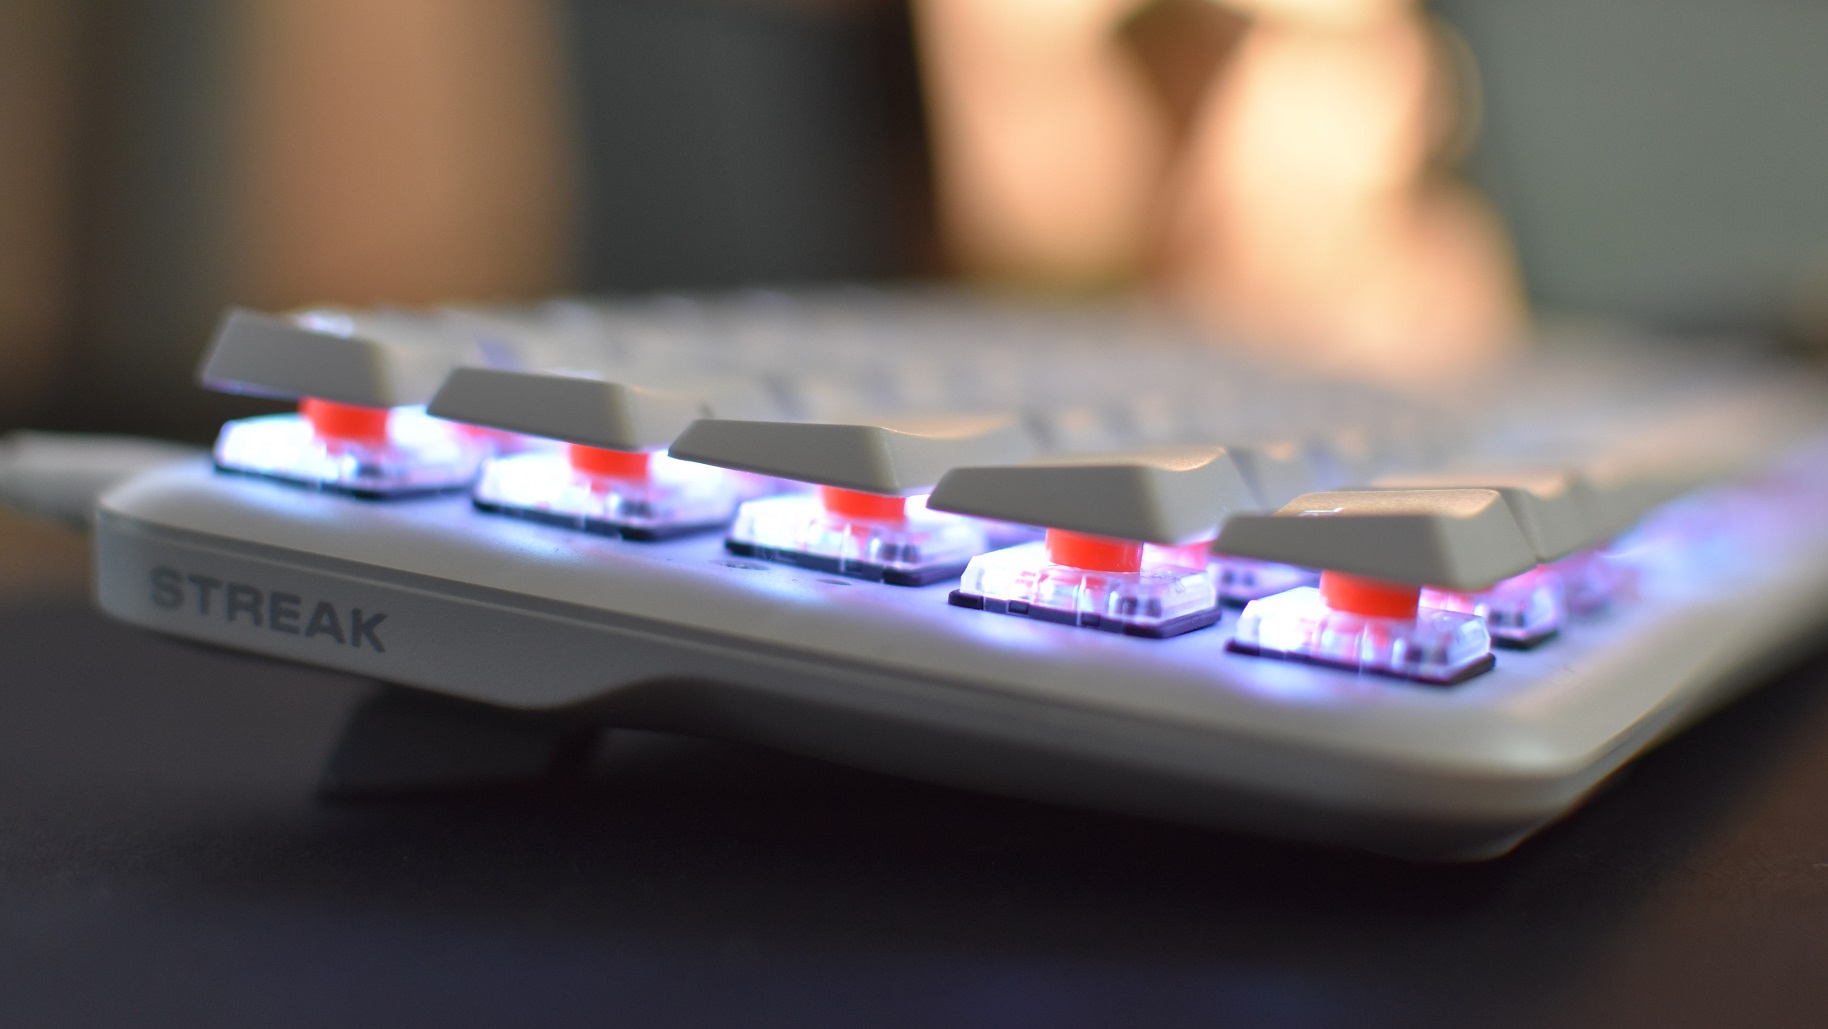 A side view of the Fnatic Streak65 LP gaming keyboard, showing its low-profile mechanical switches.